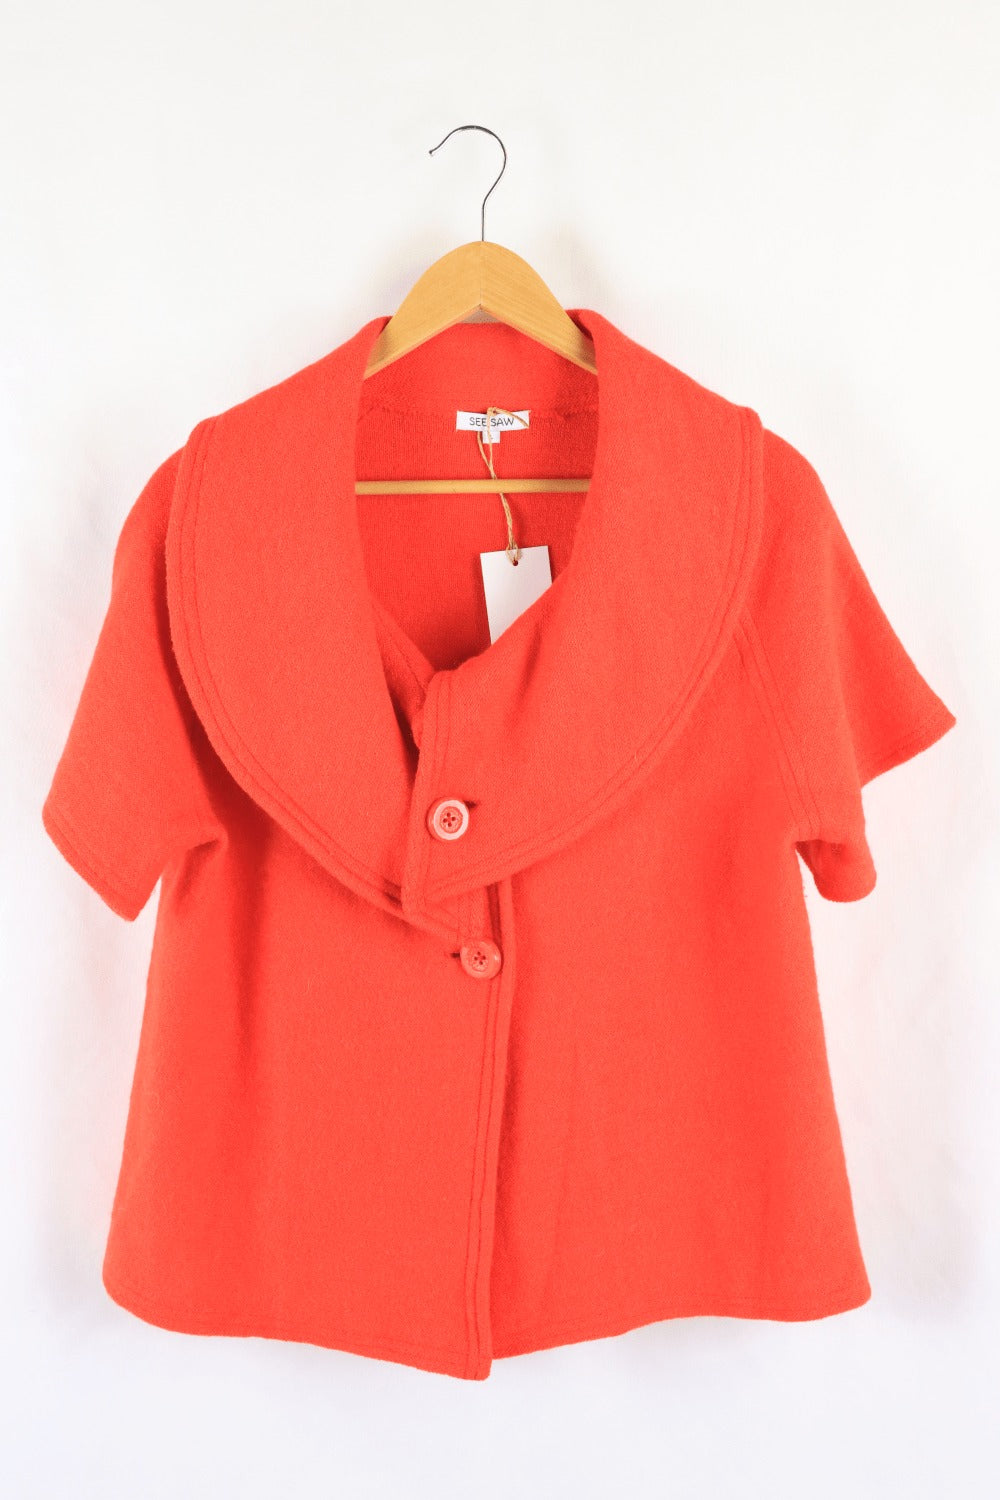 See Saw Red Jacket L